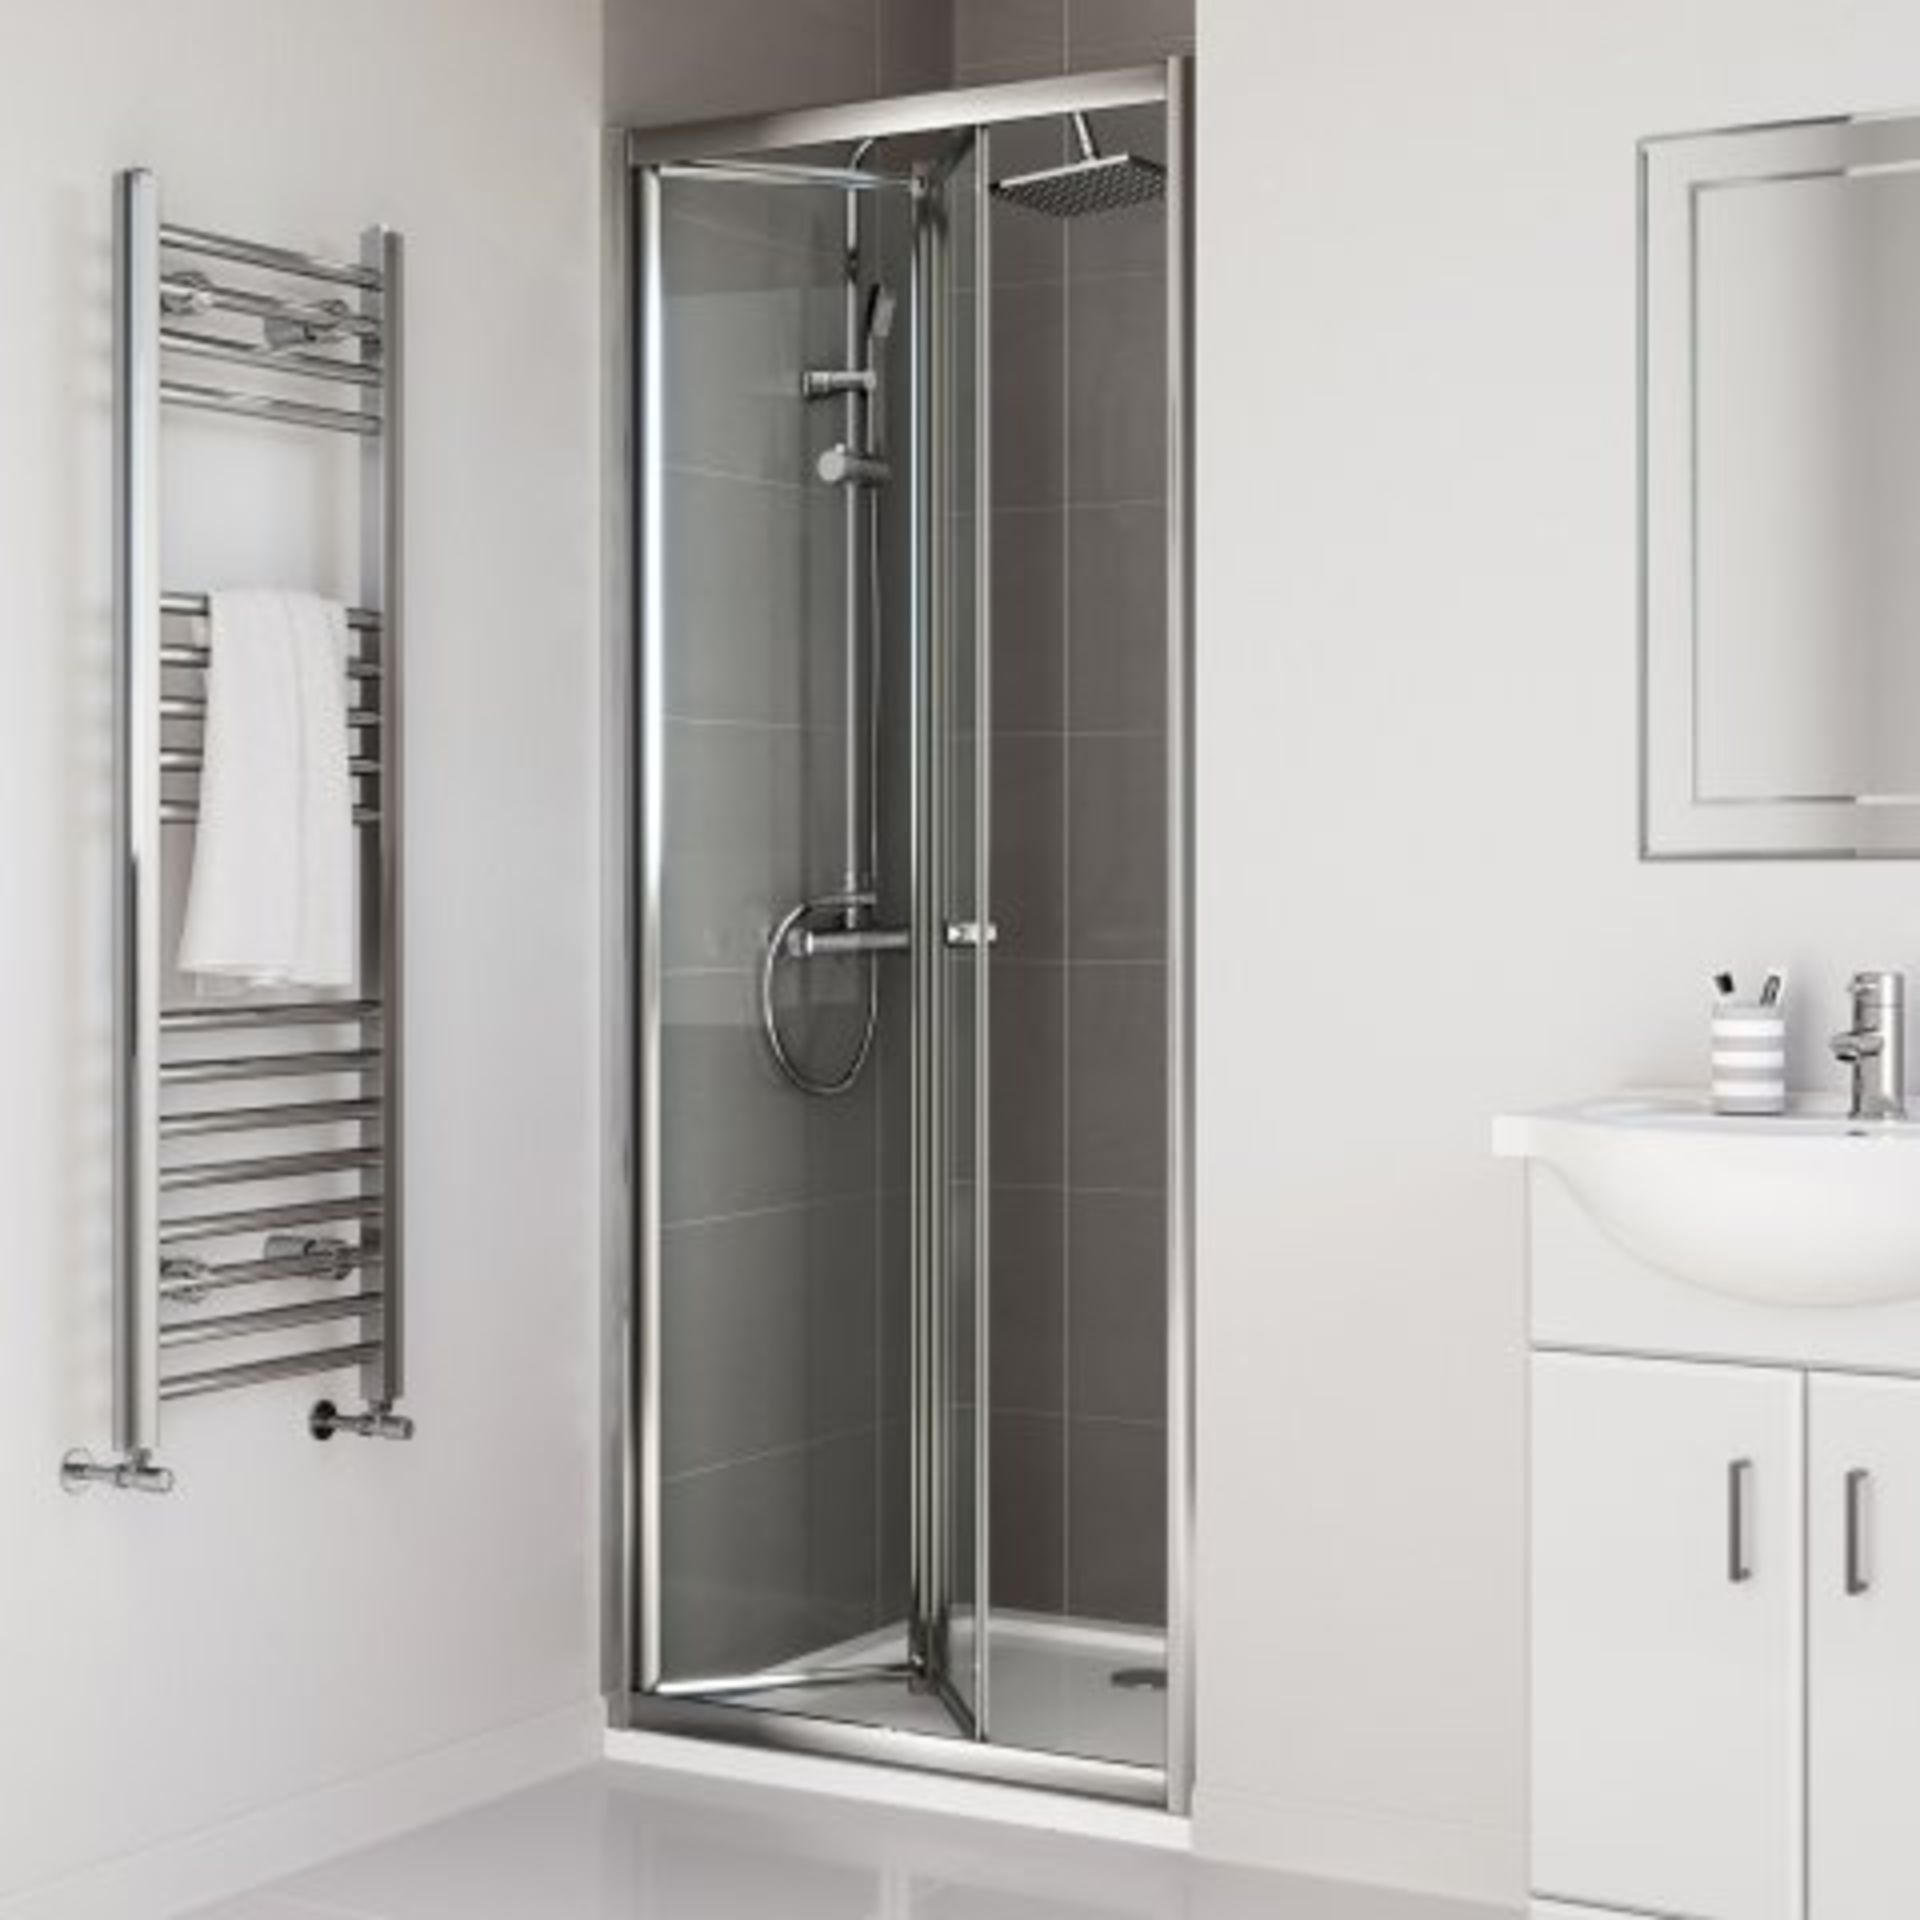 (H108) 800mm - Elements Bi Fold Shower Door. RRP £299.99._x00D__x00D_Do you have an awkward nook - Image 2 of 3